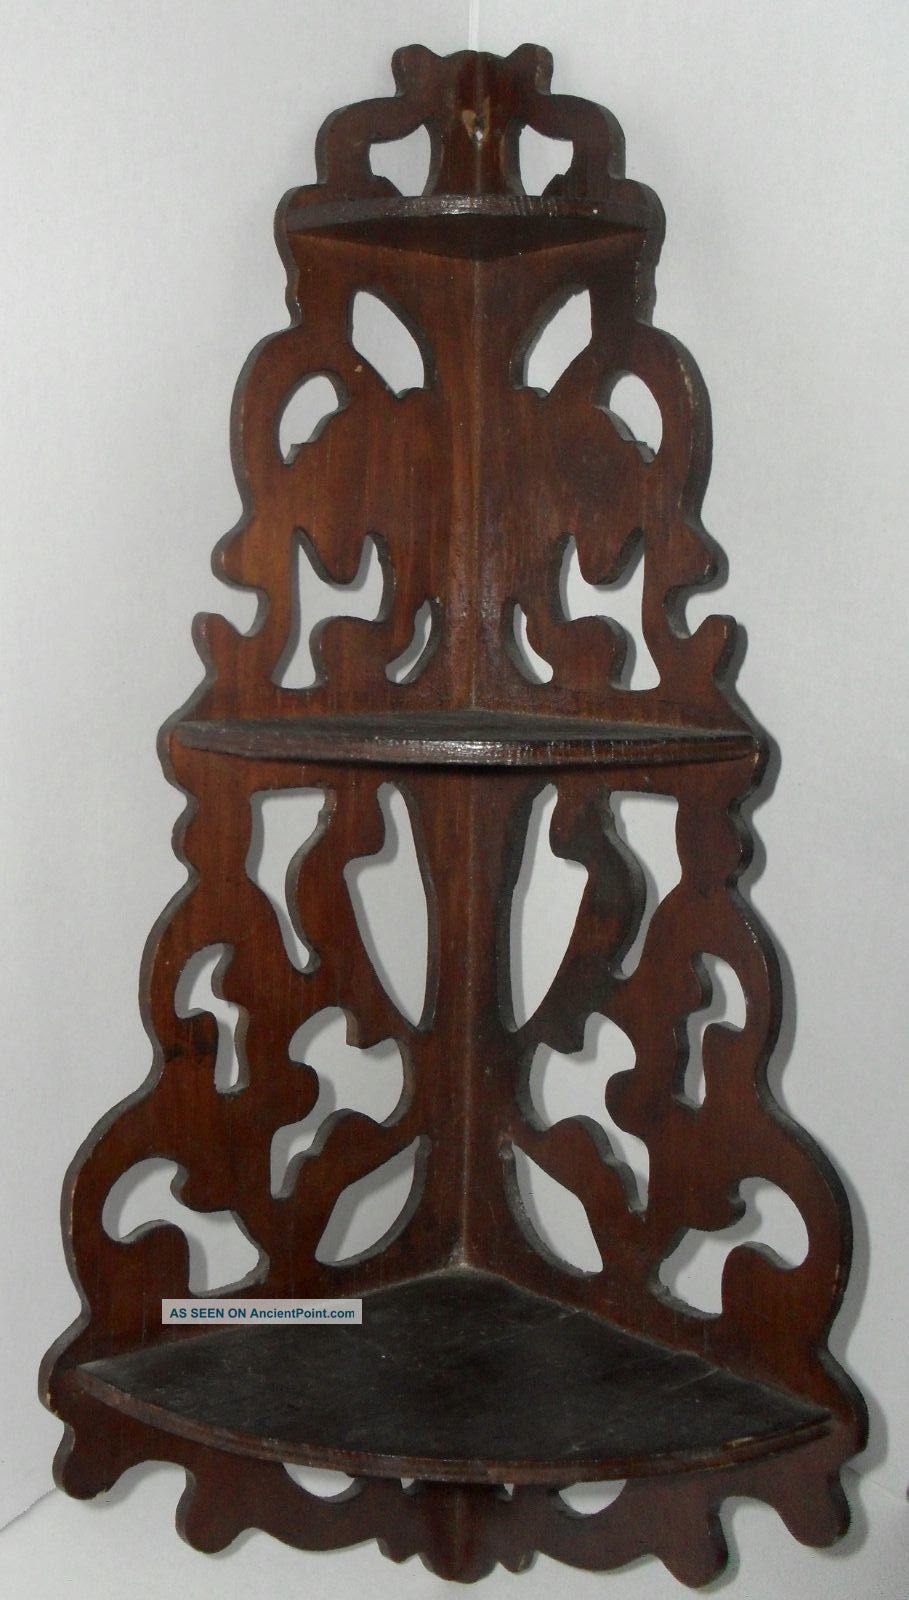 Antique Vintage Victorian Scrollwork Wood Hanging Whatnot Curio Display Shelf 1900-1950 photo